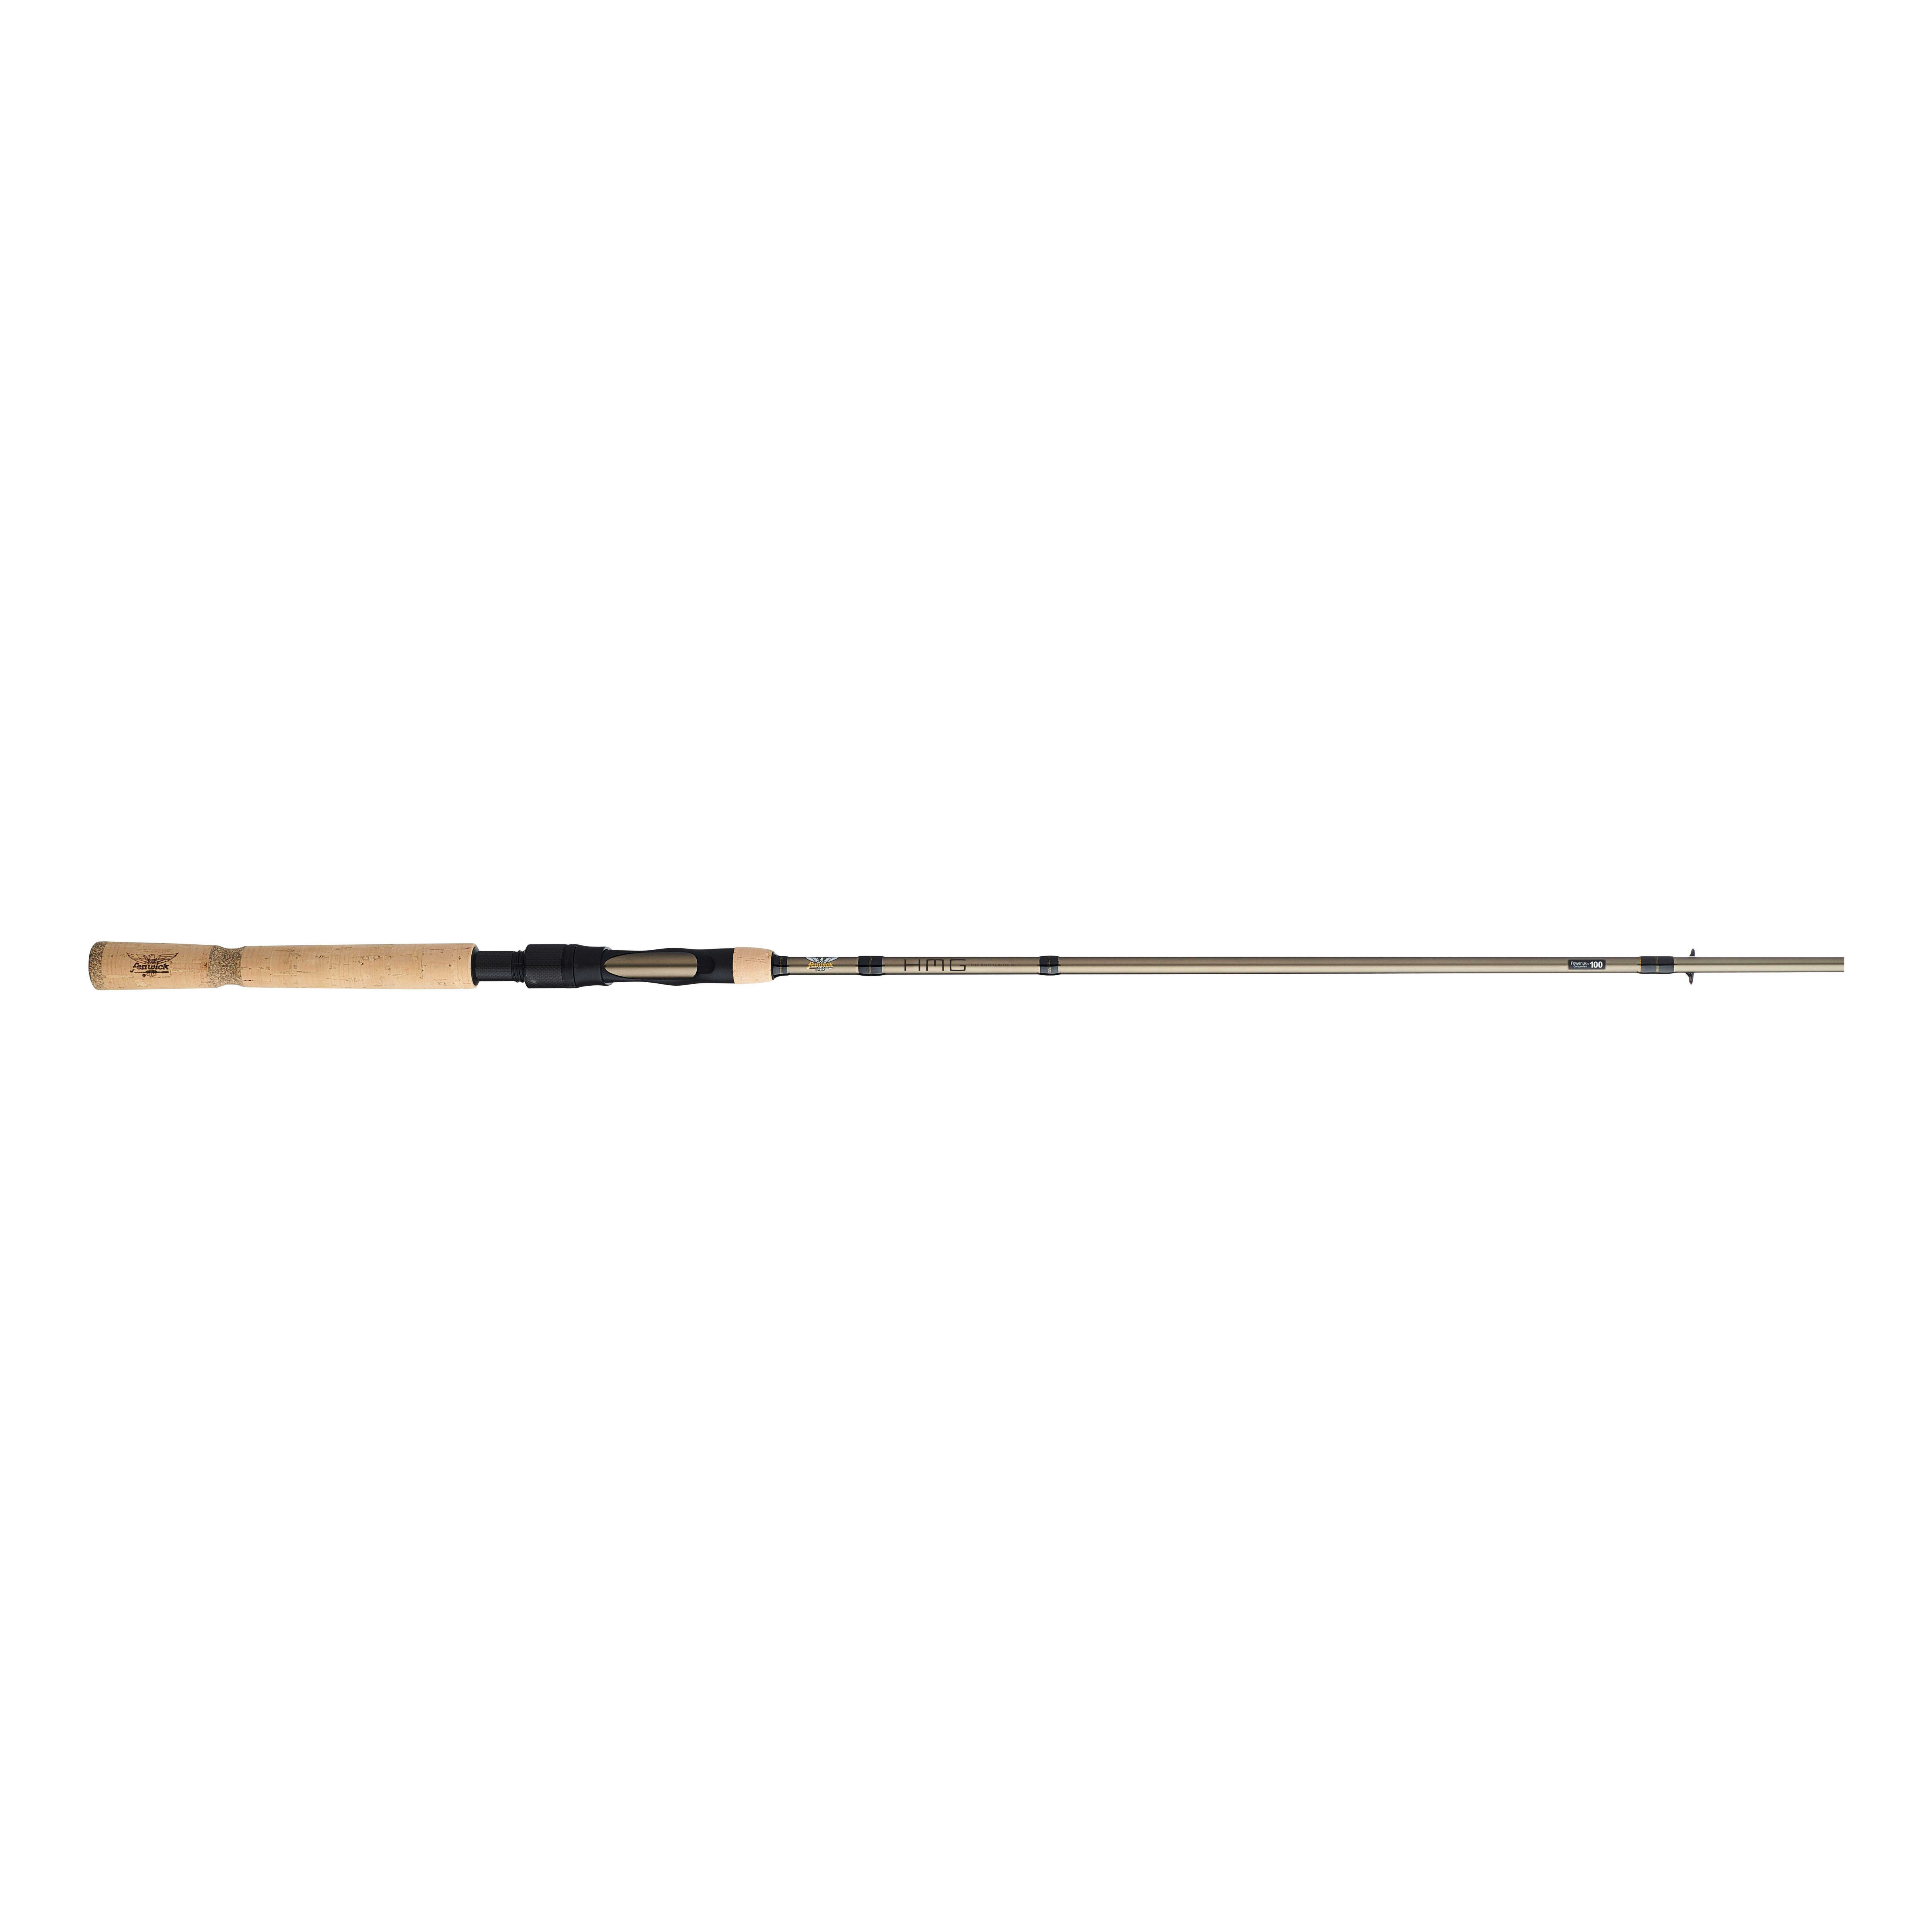 Sold at Auction: Fenwick HMG Graphite G959L Spinning Rod, New